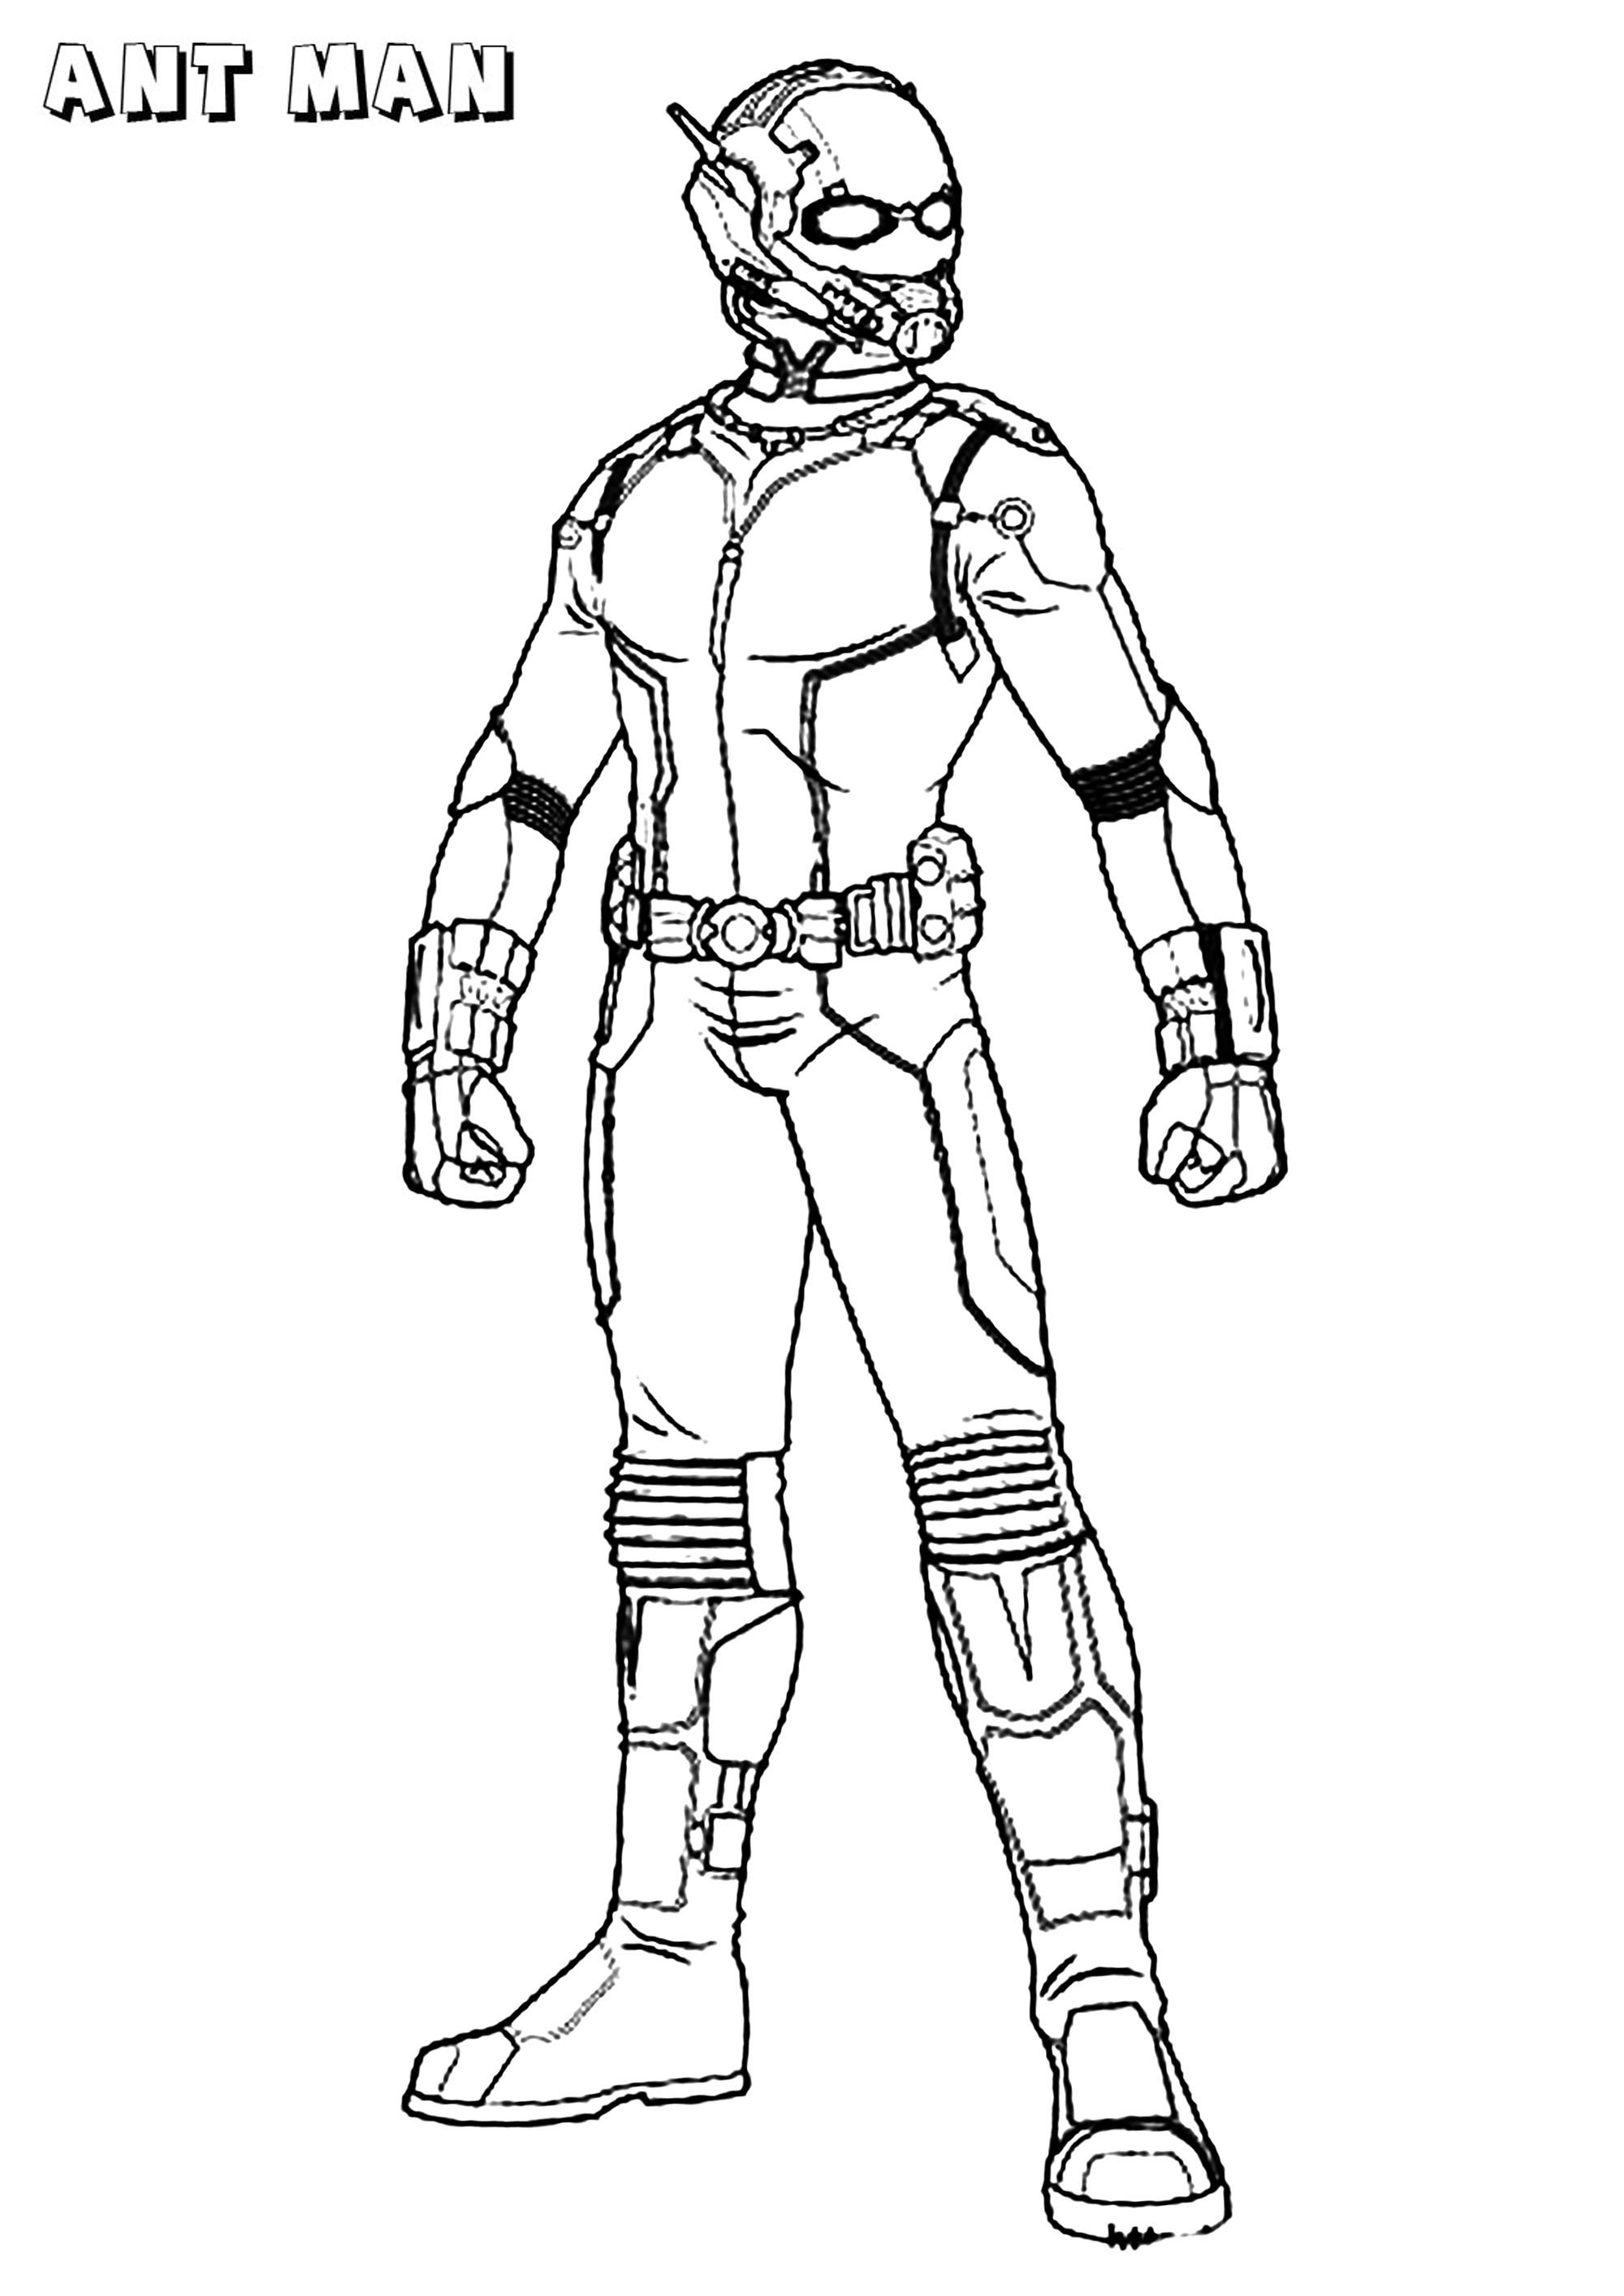 Ant Man - Ant-Man Kids Coloring Pages